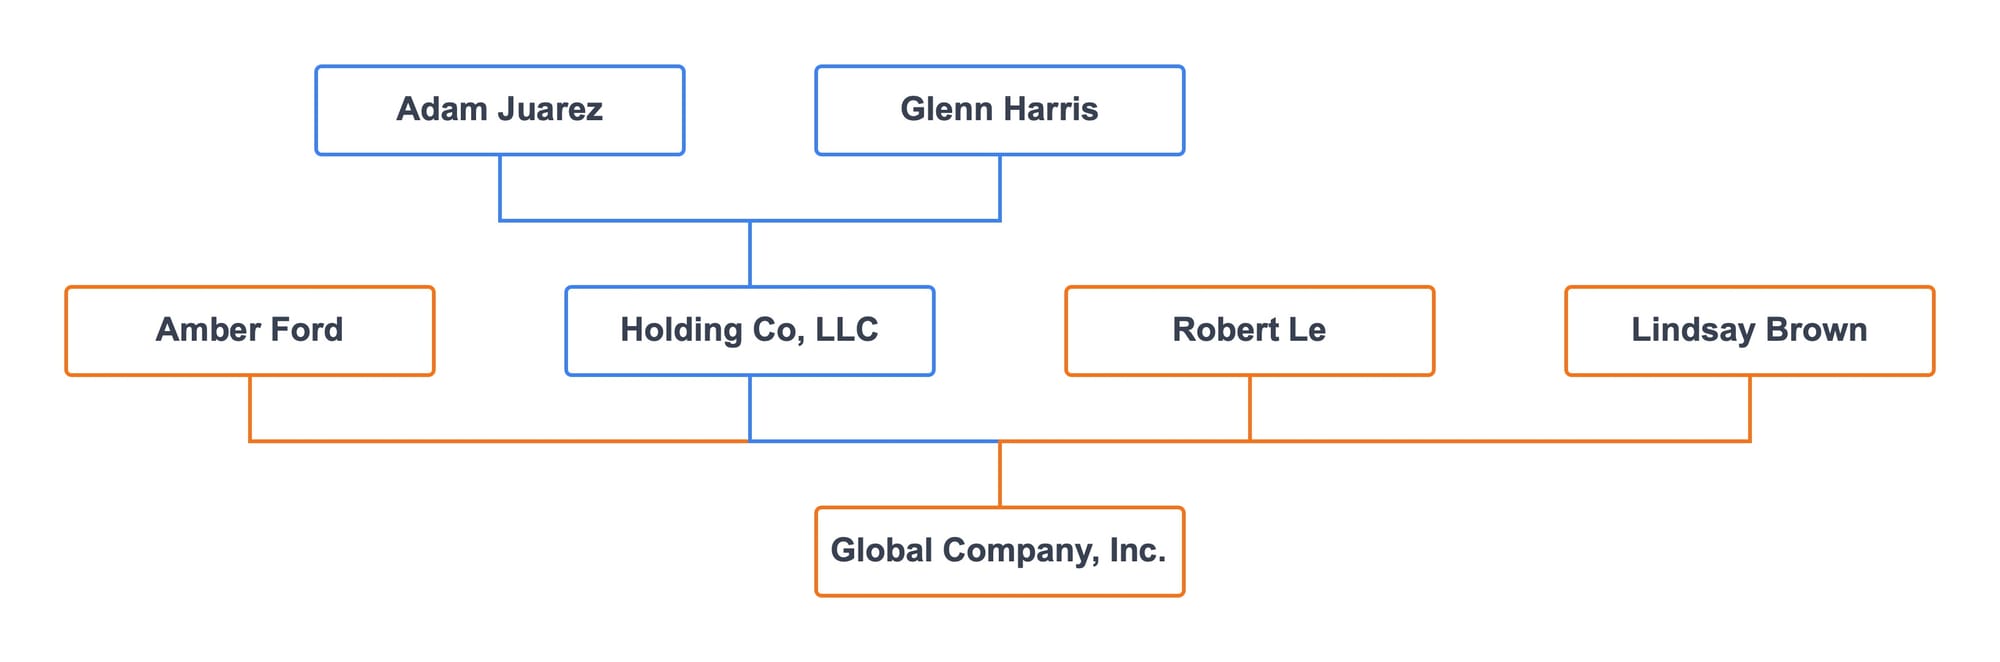 Holding Co owns Global Co